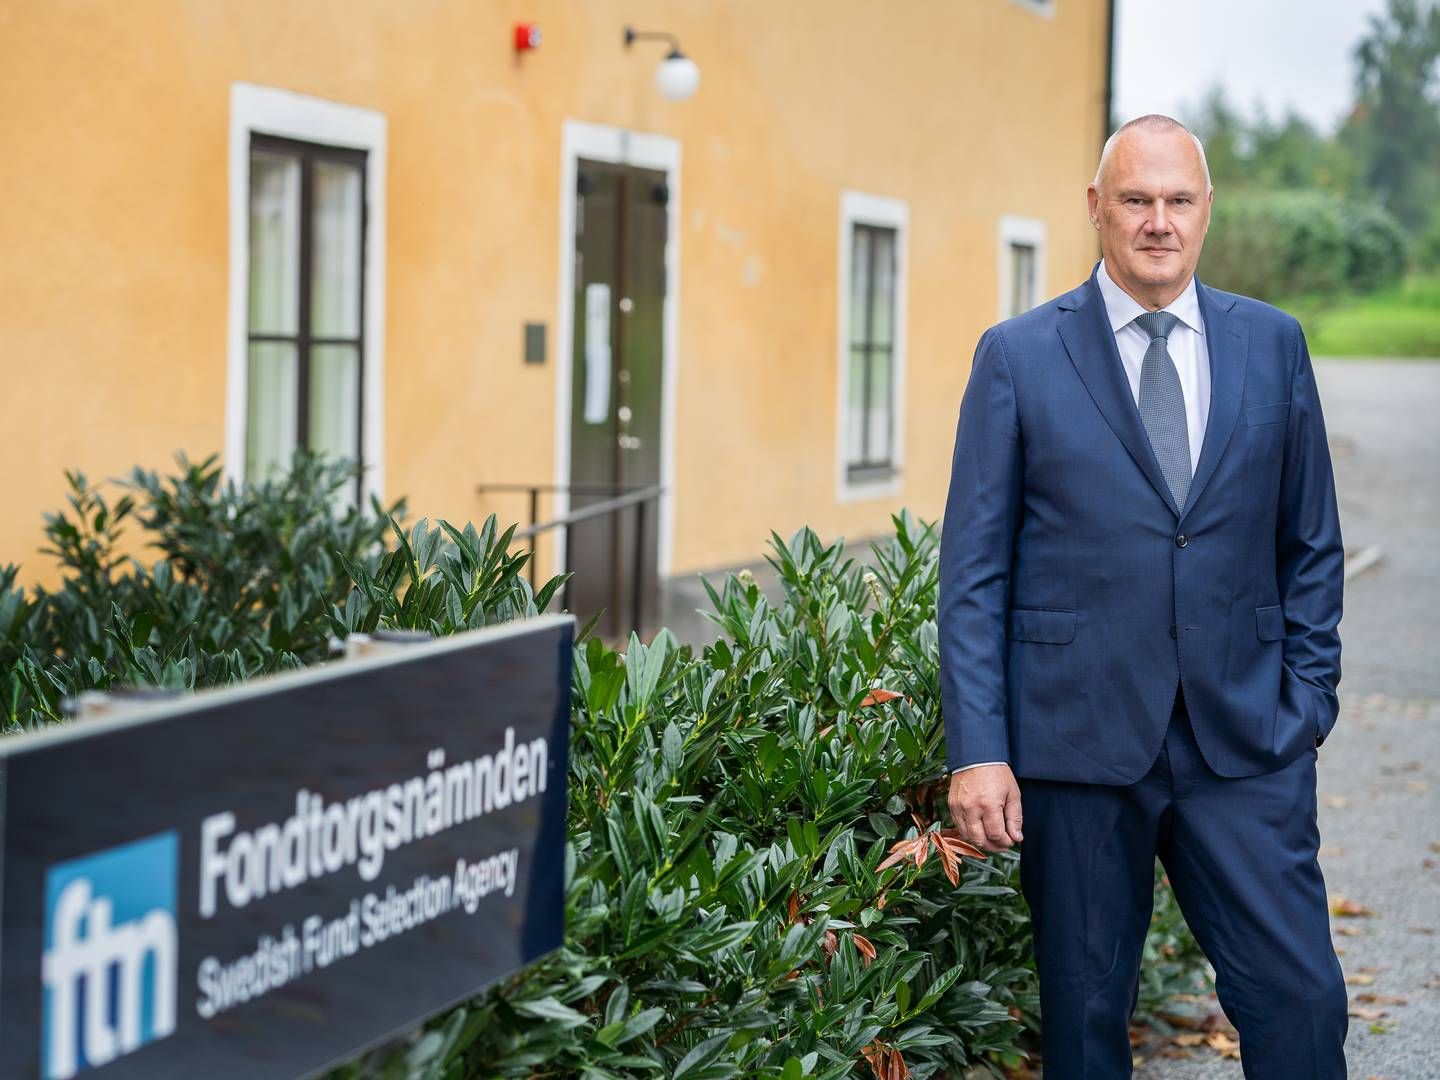 The executive director of FTN, Erik Fransson, says that "our aim is to improve the fund offering for pension savers as quickly as possible." | Foto: Fondtorgsnämnden / PR